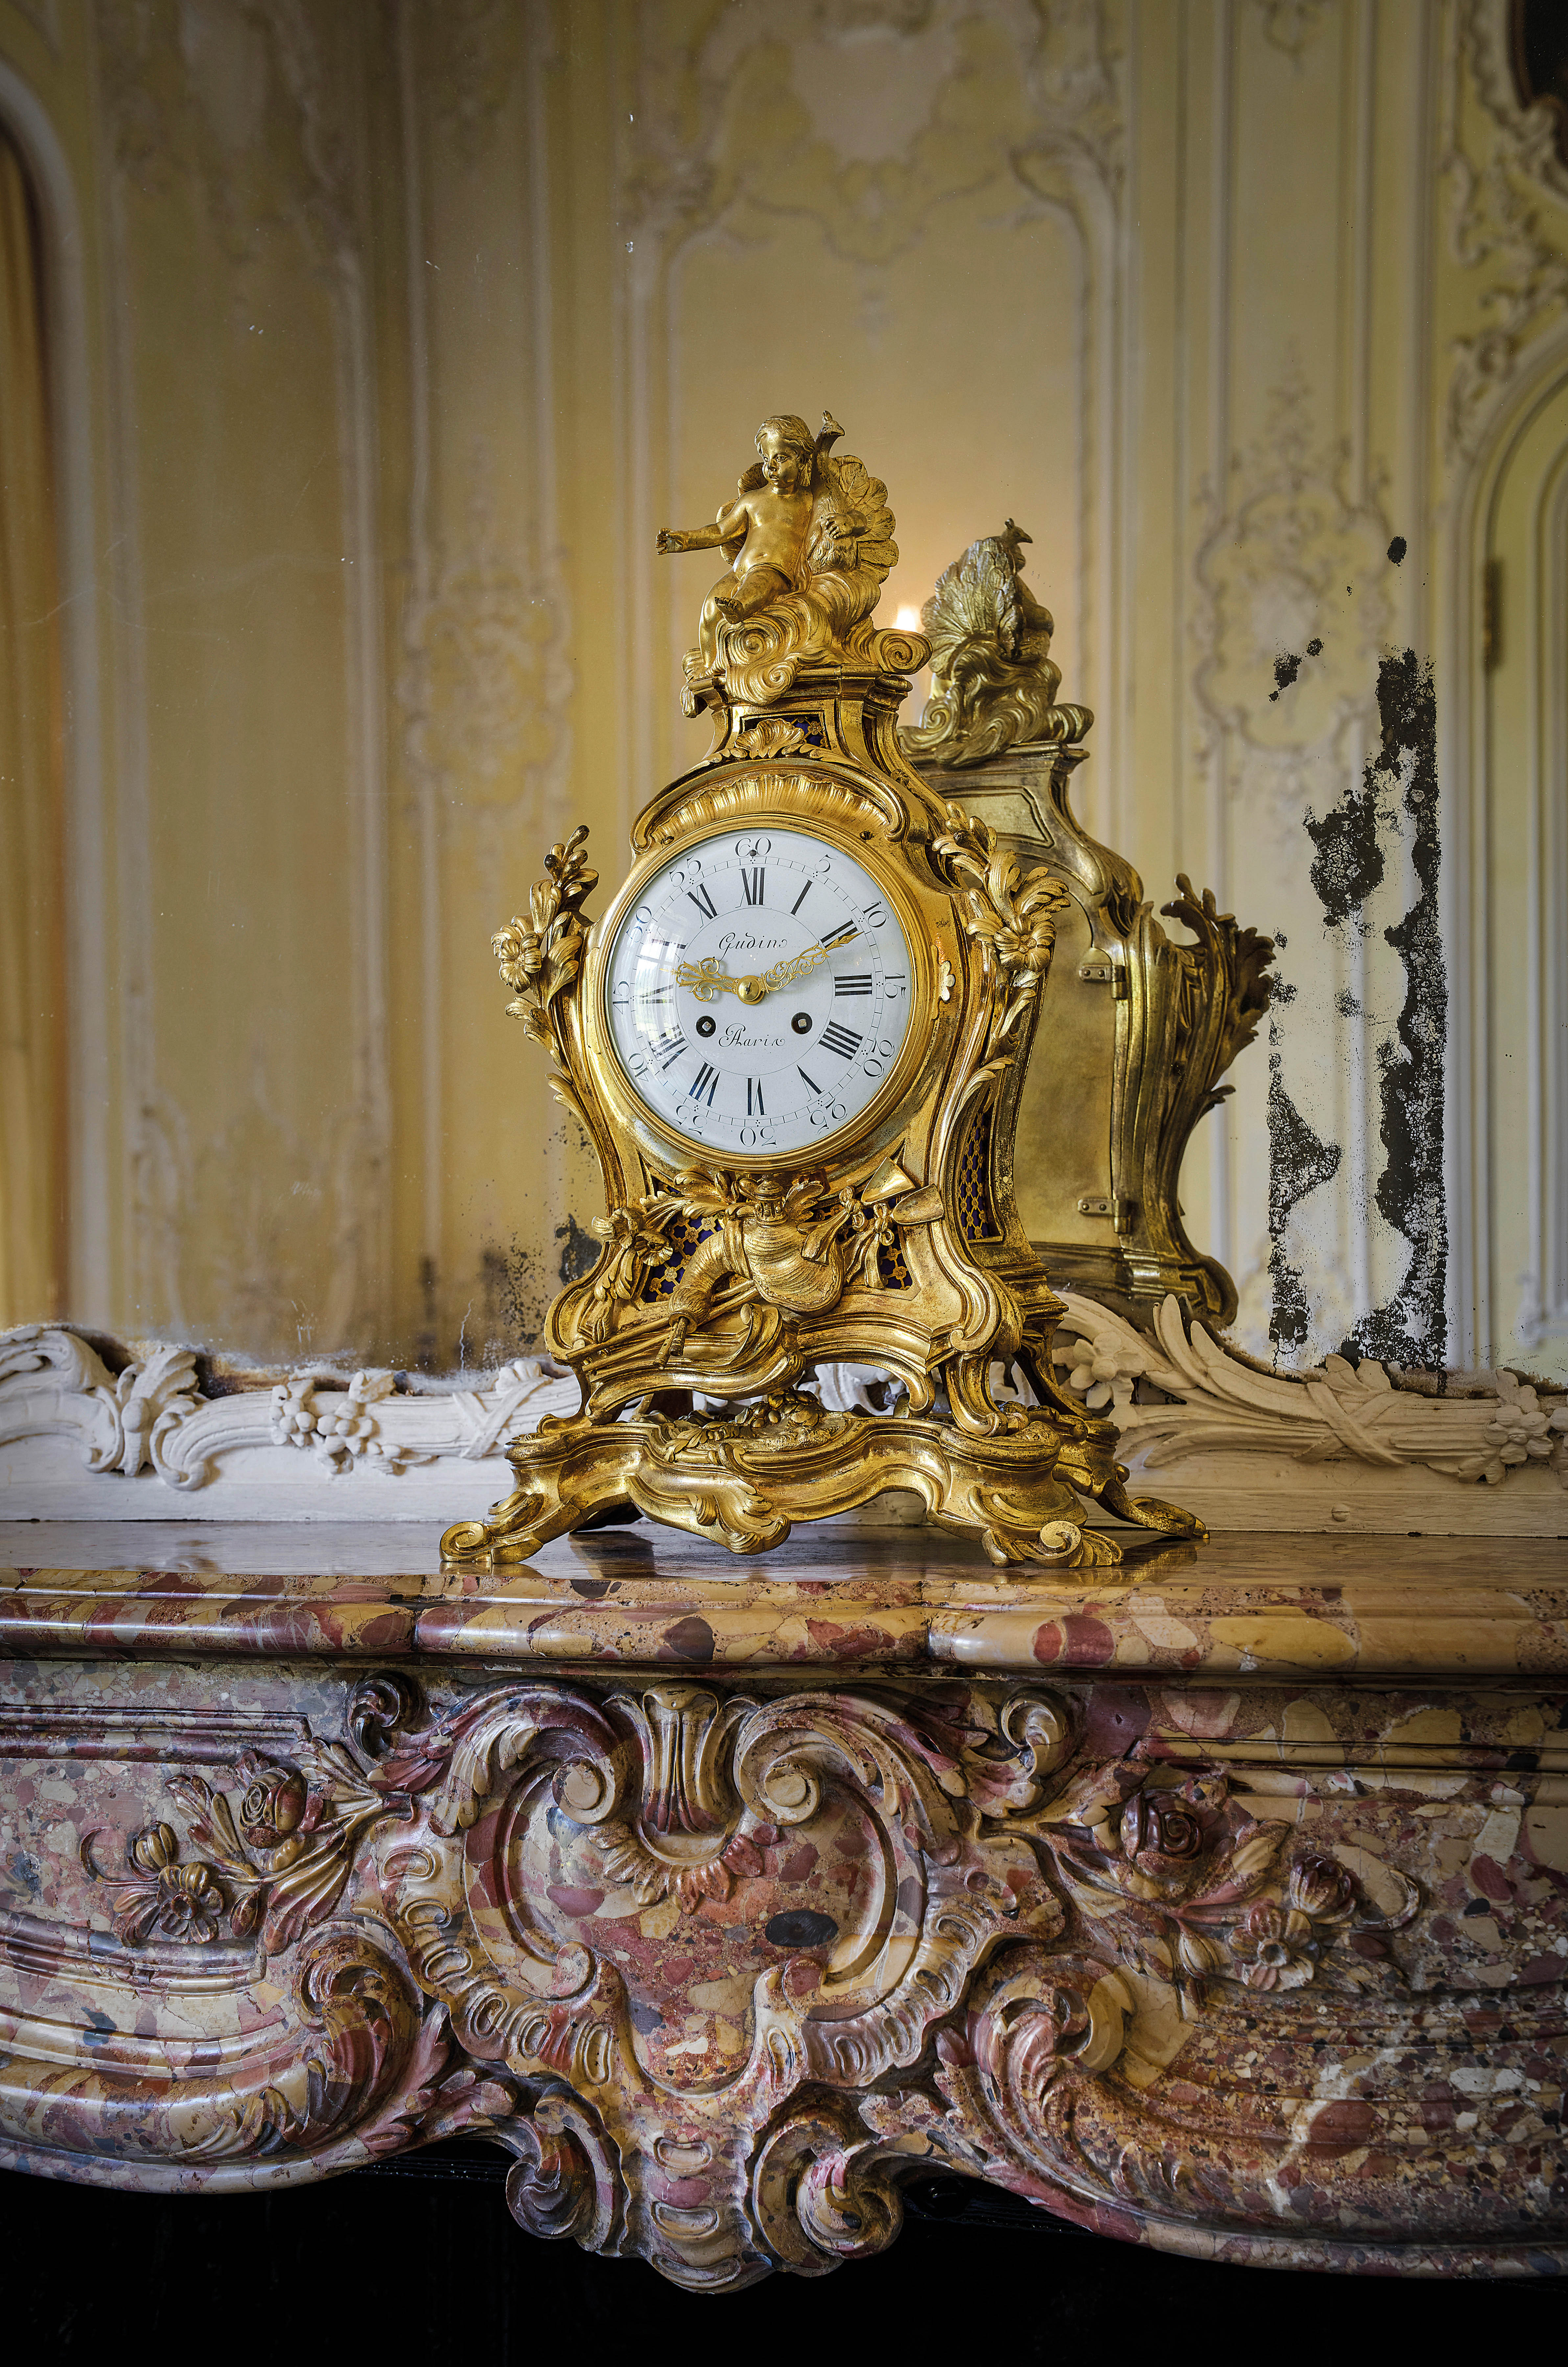 A FRENCH ORMOLU MANTEL CLOCK IN LOUIS XV STYLE, 19TH CENTURY the brass drum movement with an outside